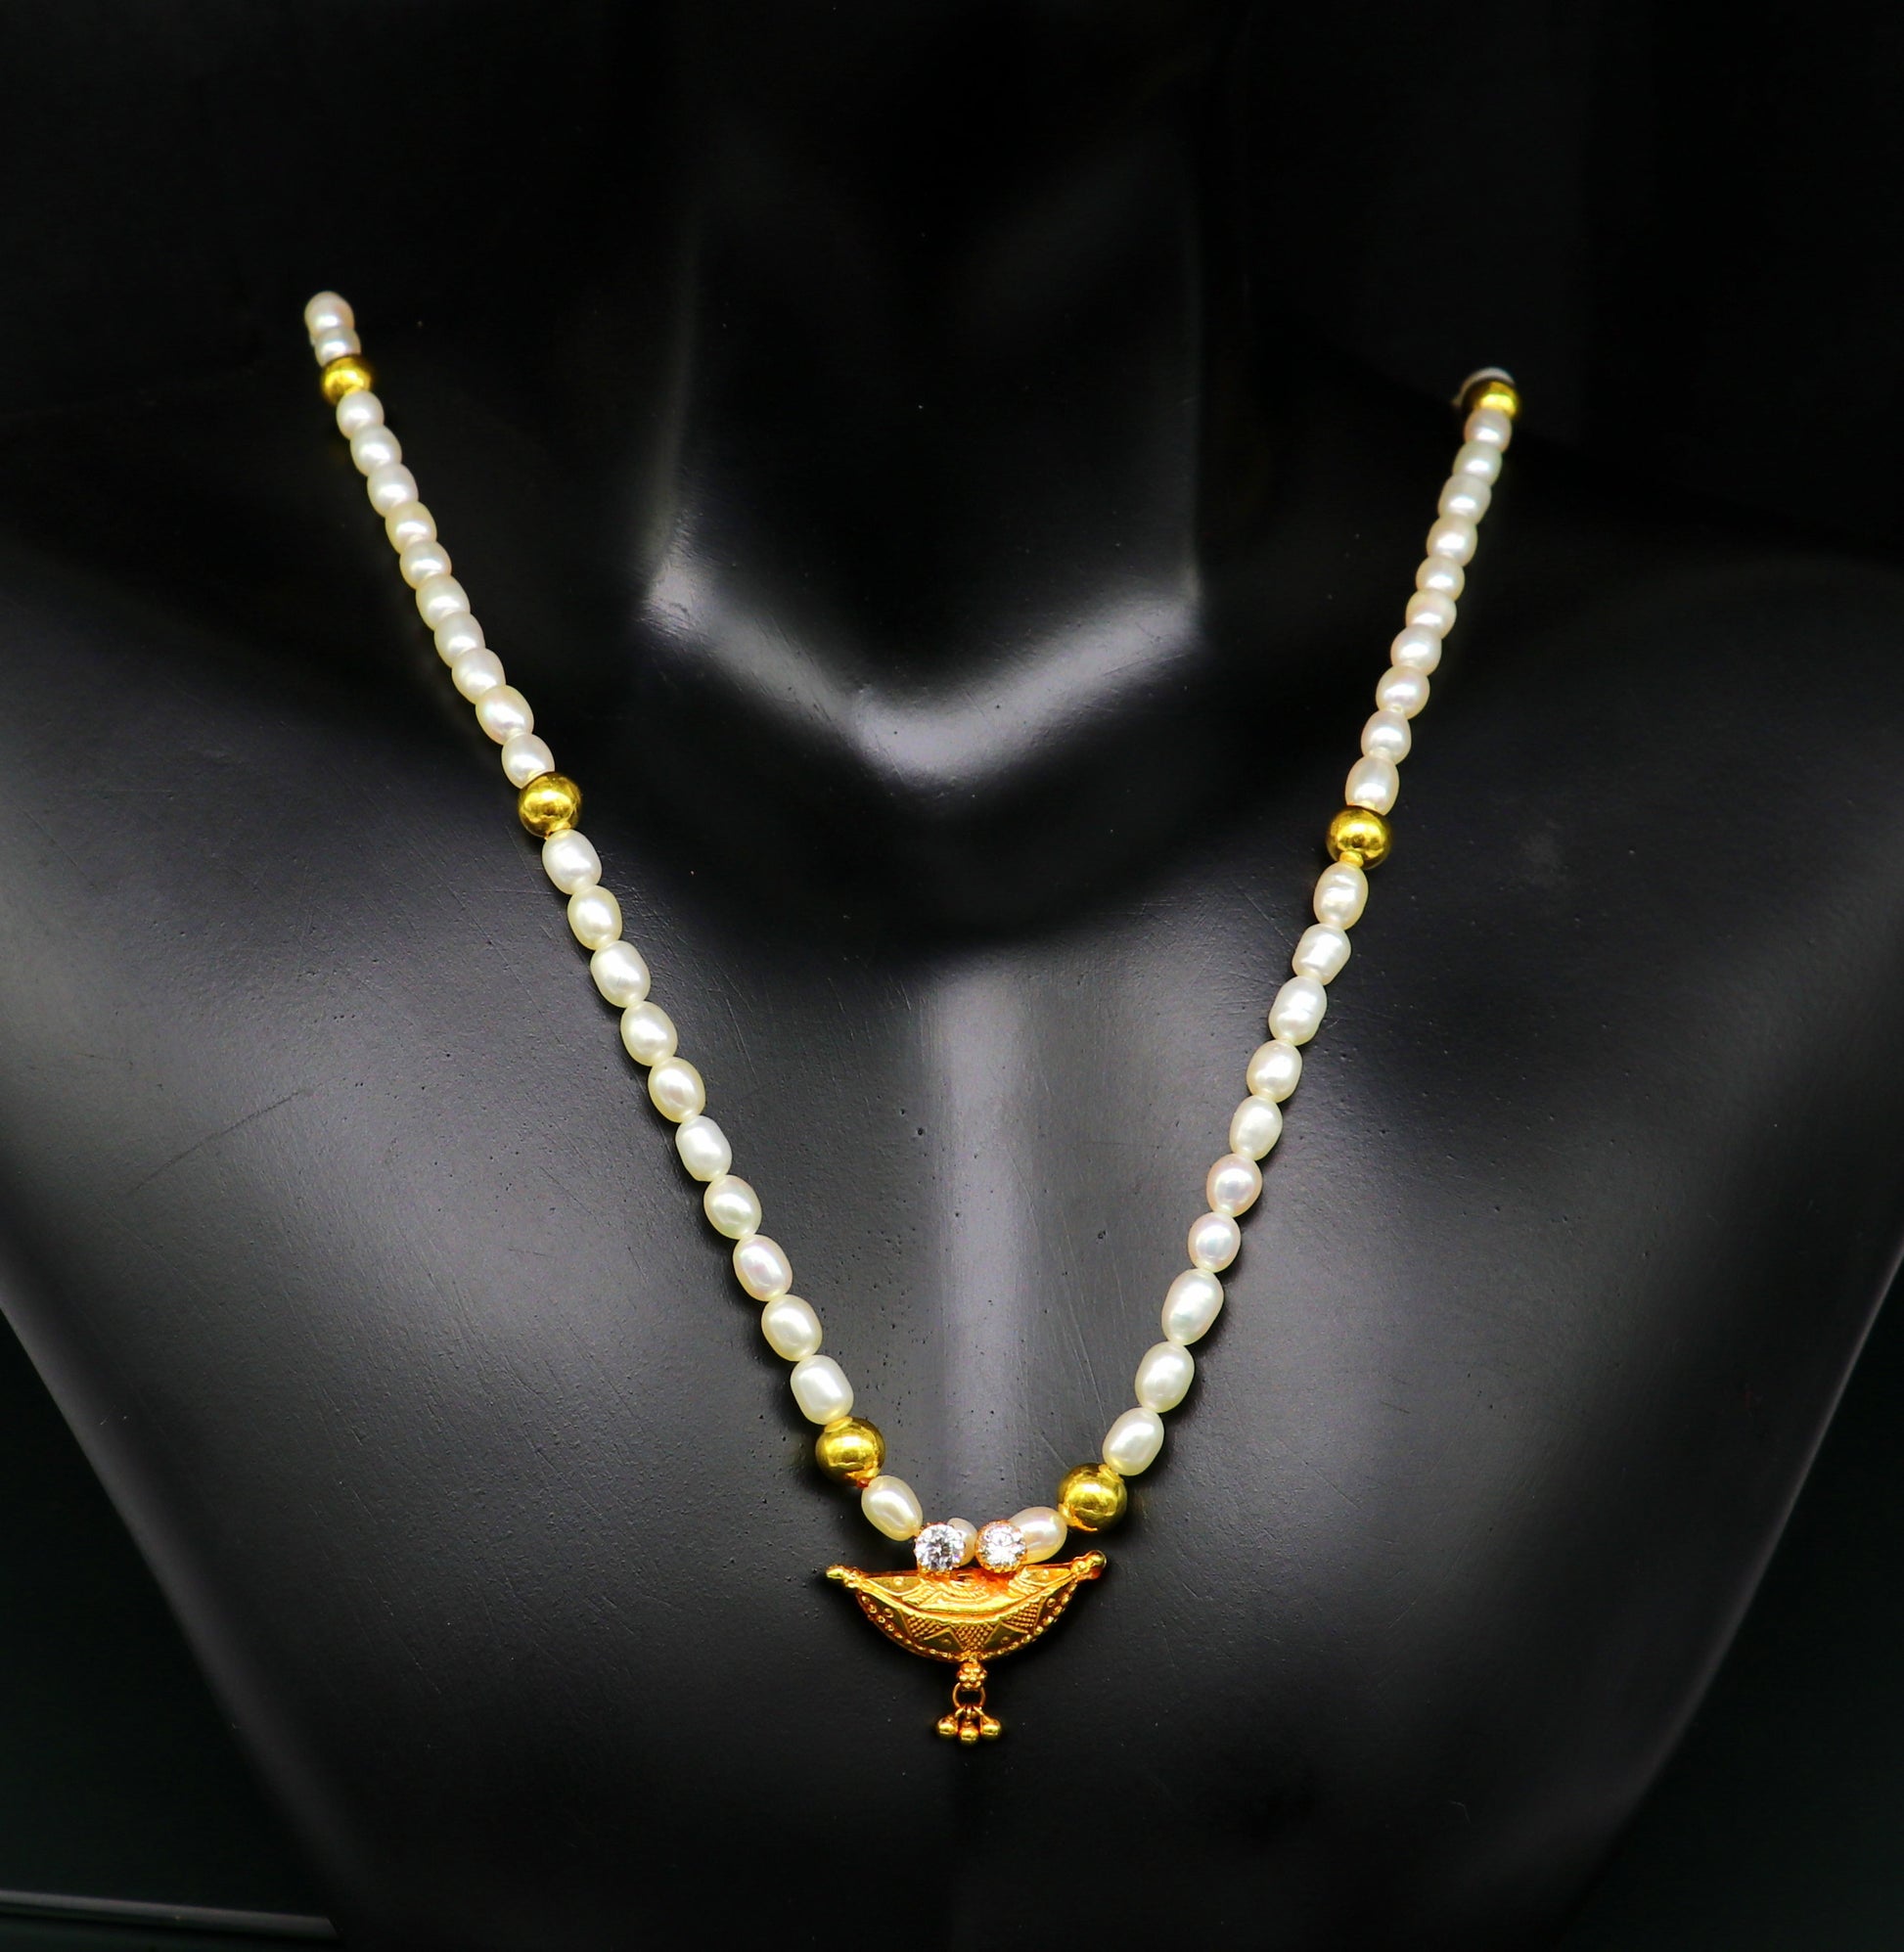 18" peals beaded with 6 gold beads necklace, fabulous 20kt yellow gold amulet style pendant, excellent customize gift stylish jewelry ap04 - TRIBAL ORNAMENTS